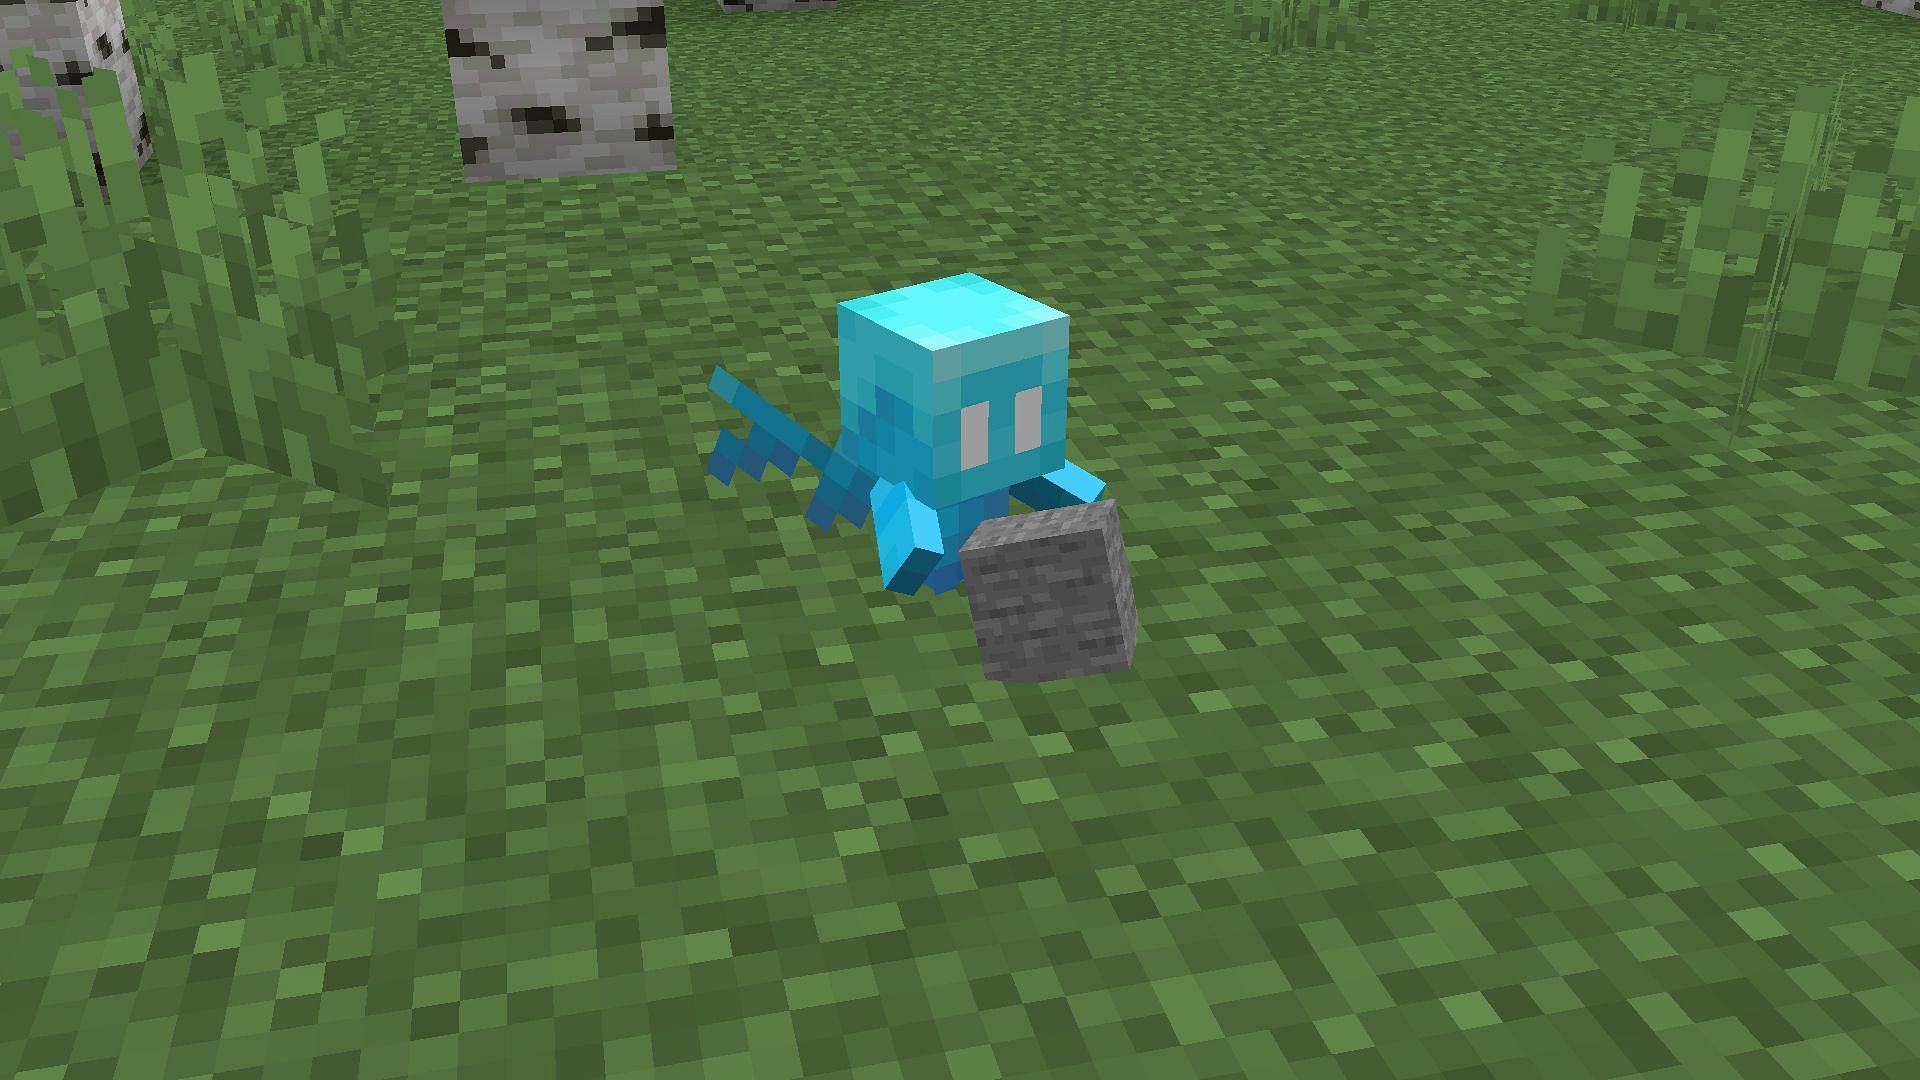 These mobs can regenerate 2 HP per second (Image via Minecraft)